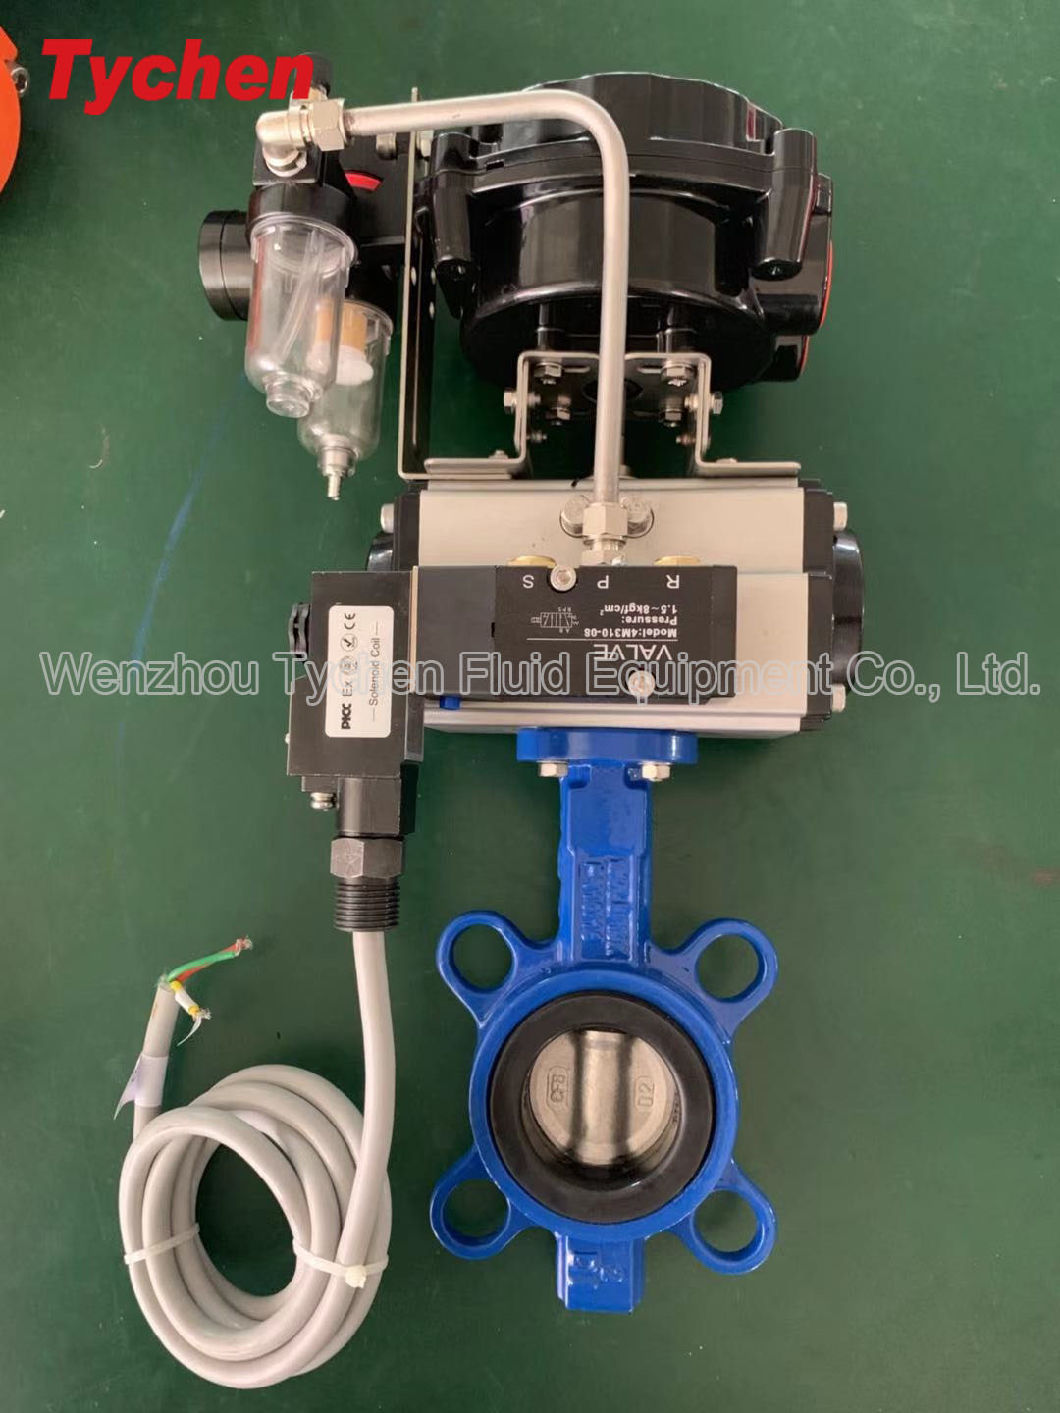 Explosion-Proof CT6 Limit Switch Box Its300 with Pneumatic Butterfly Valve